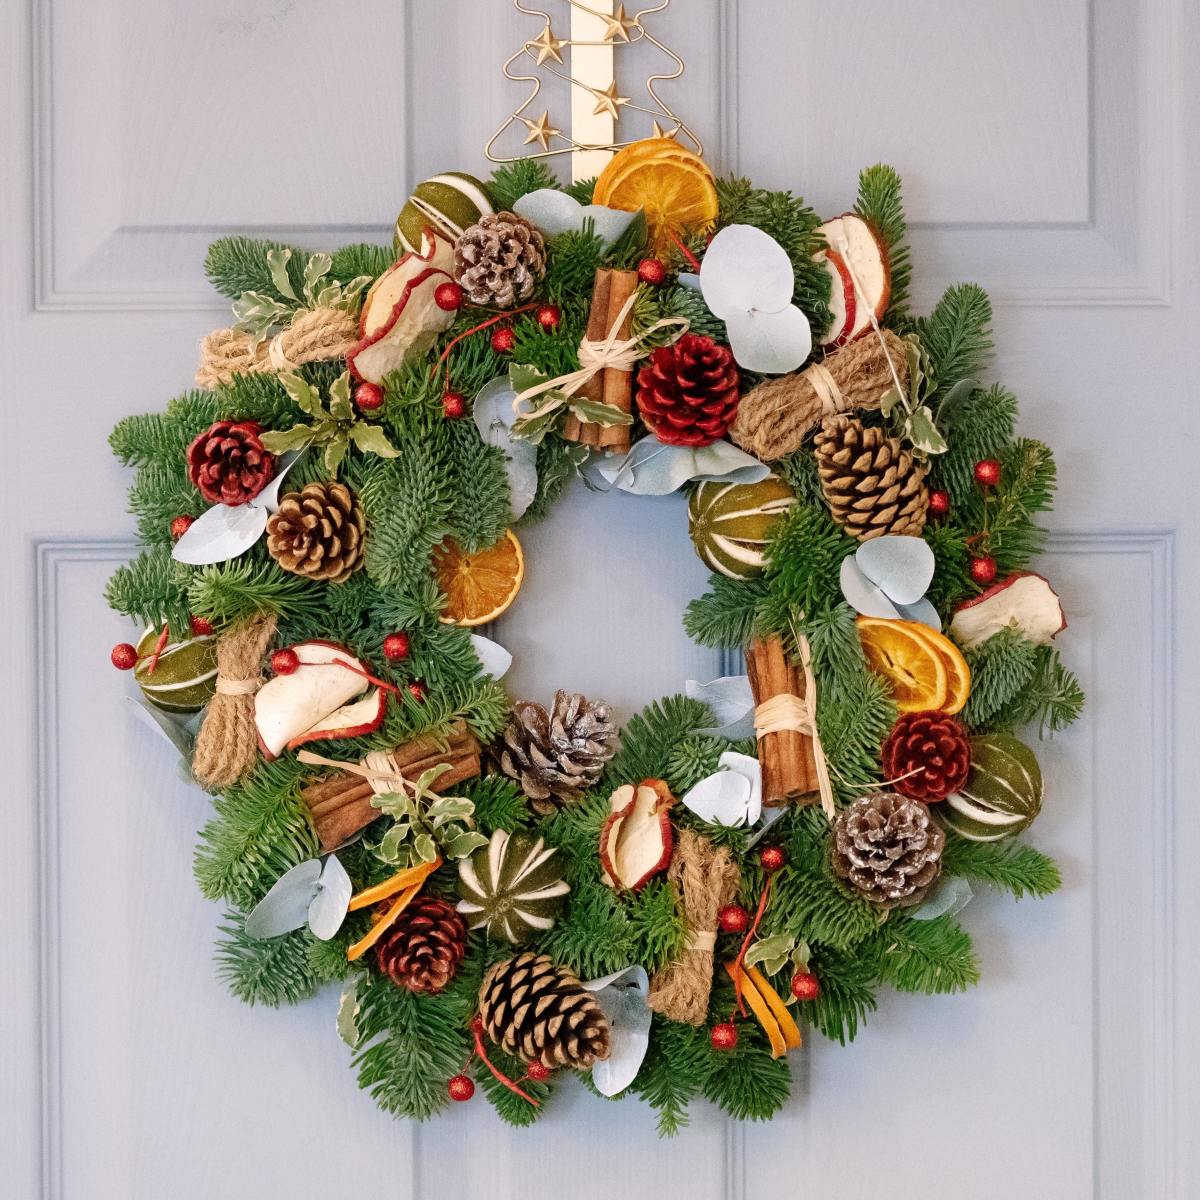 The Origins of Christmas Wreaths (A Tradition's Humble Beginnings)